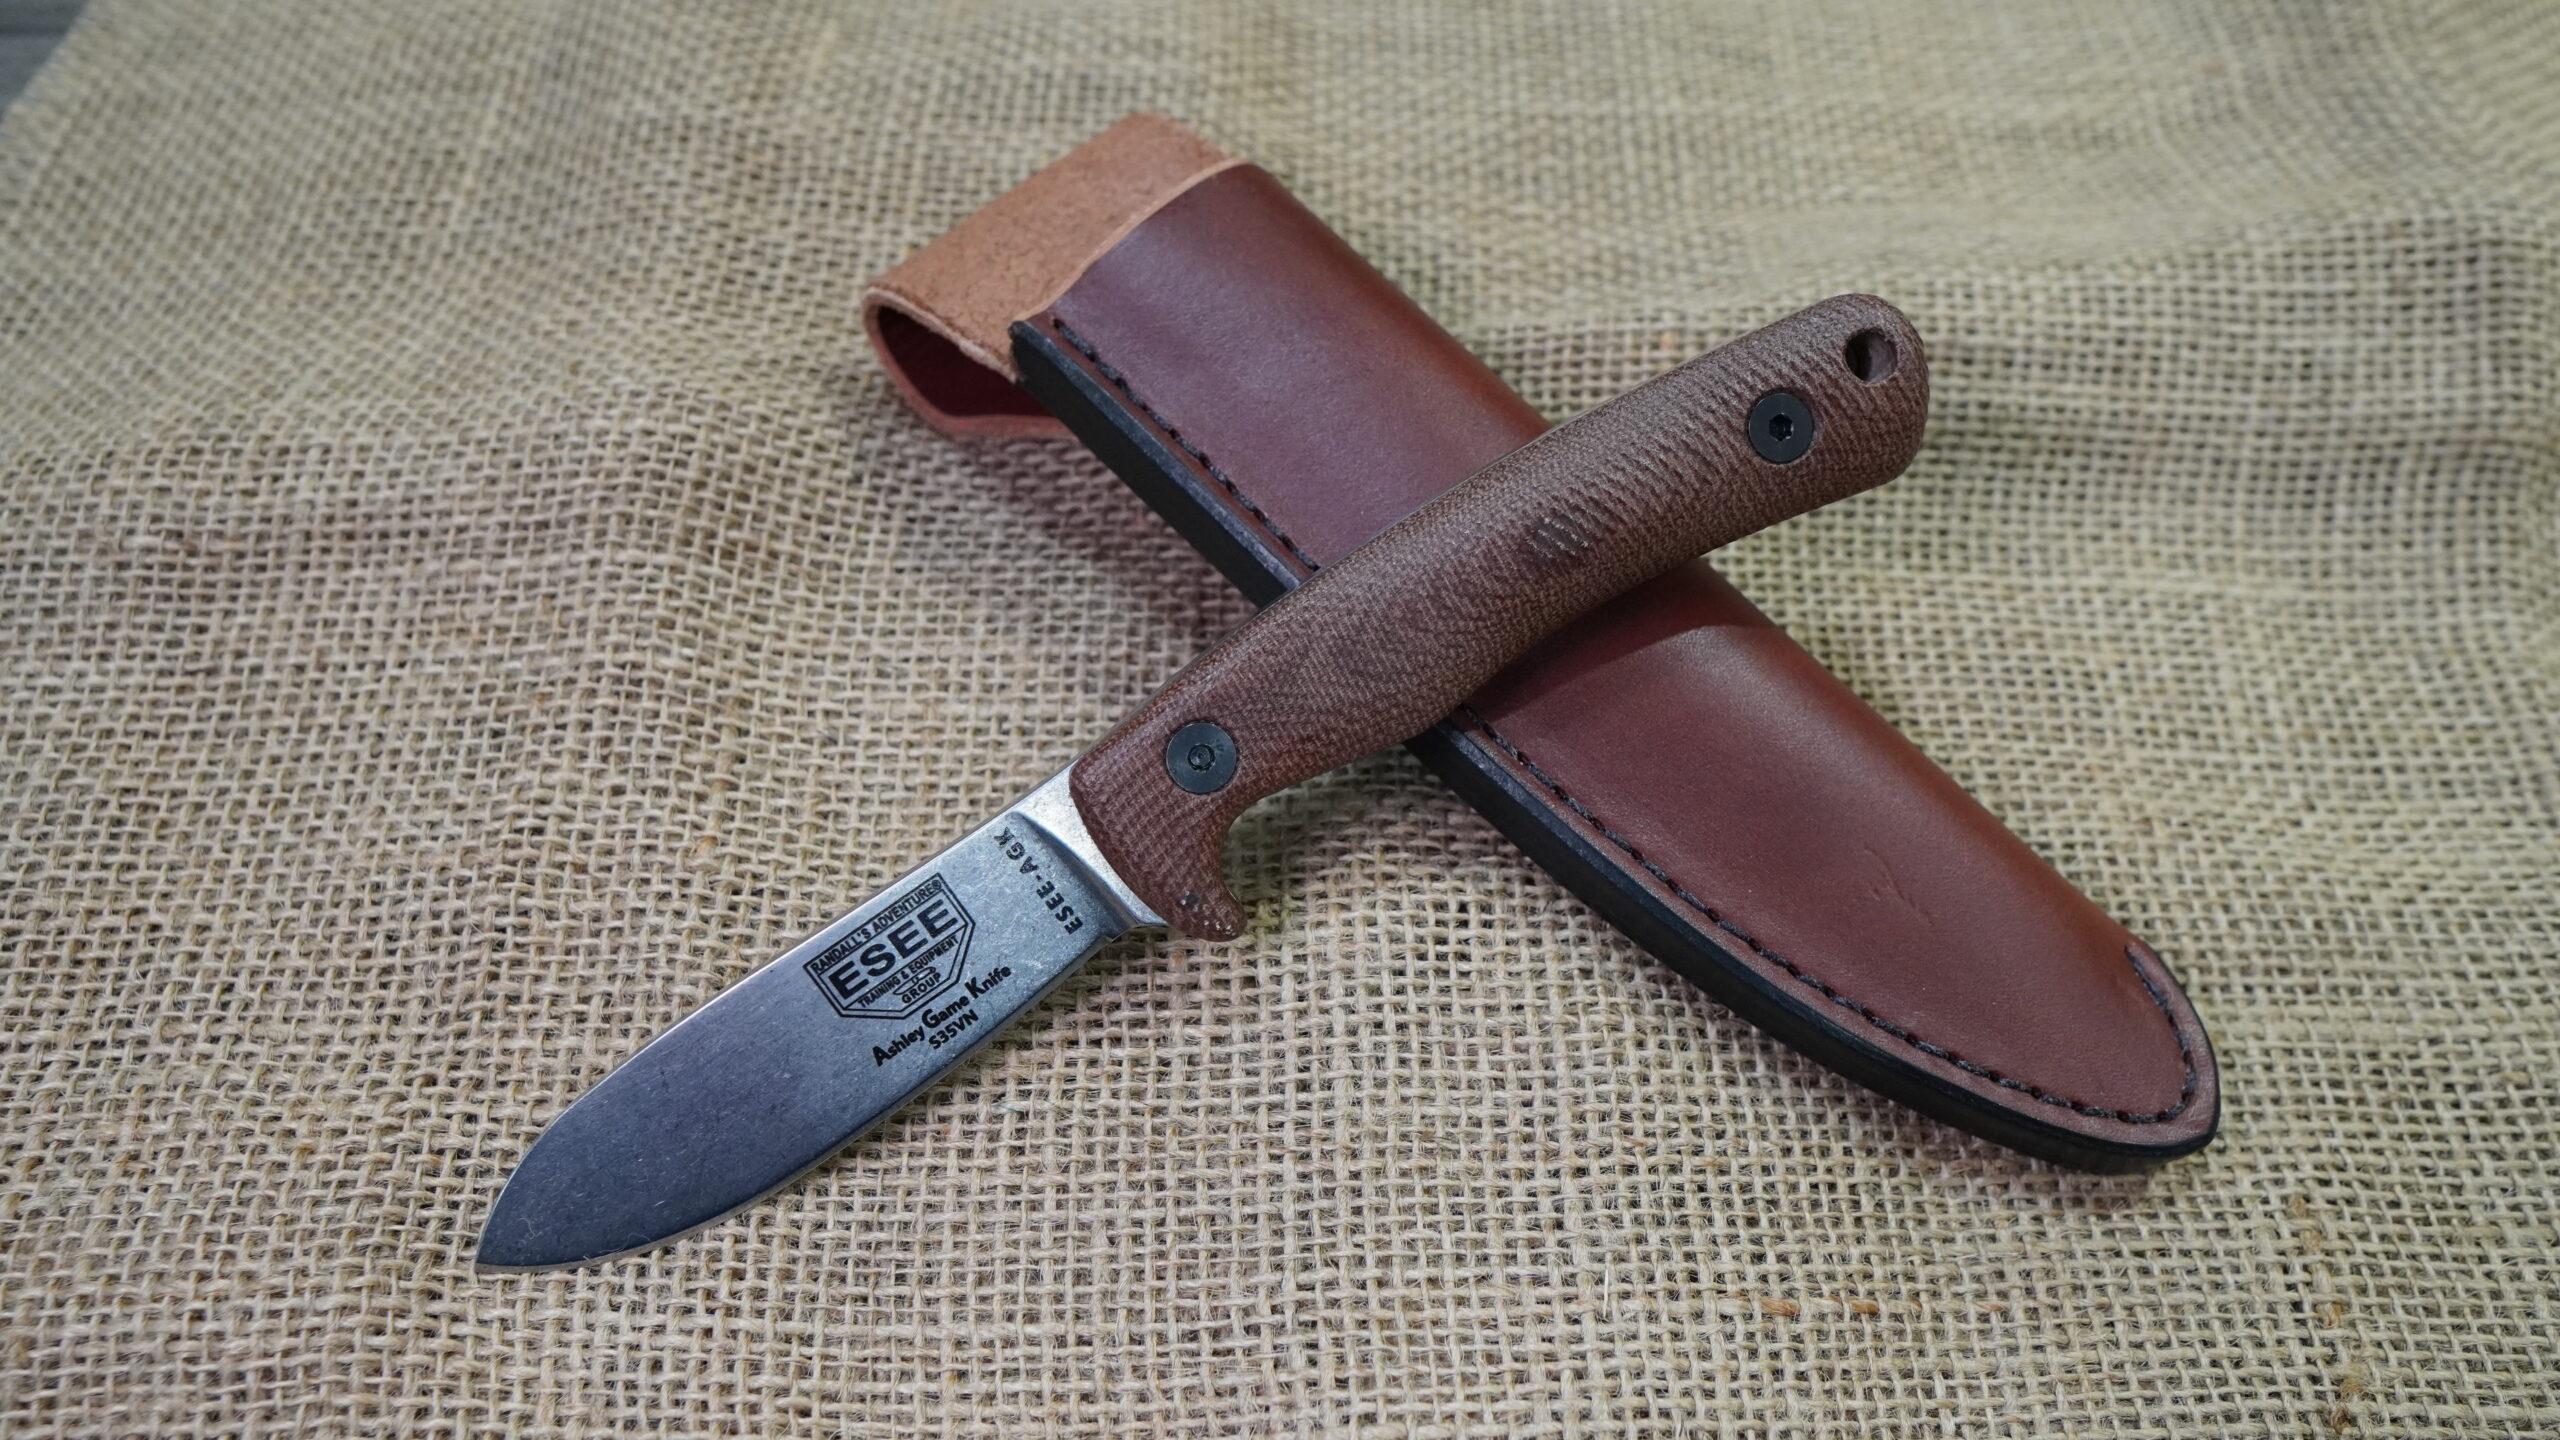 Hurry!  Just Slashed Prices of Top-Notch Knife Brands by 62